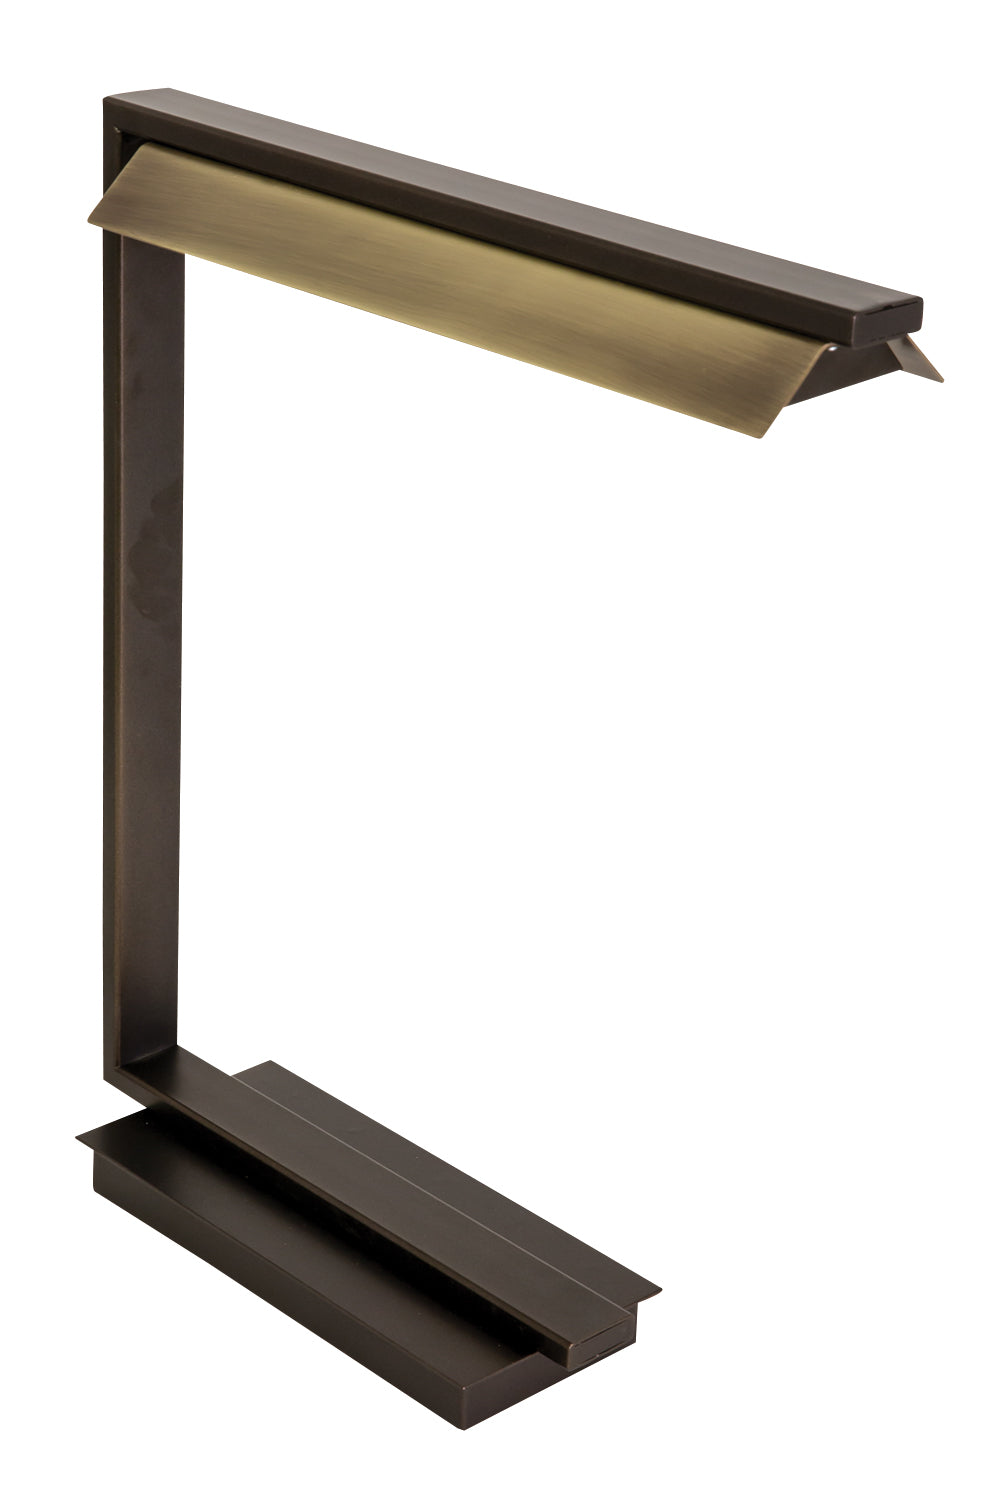 House of Troy 19" Jay LED Table Lamp in Chestnut Bronze with Antique Brass JLED550-CHB